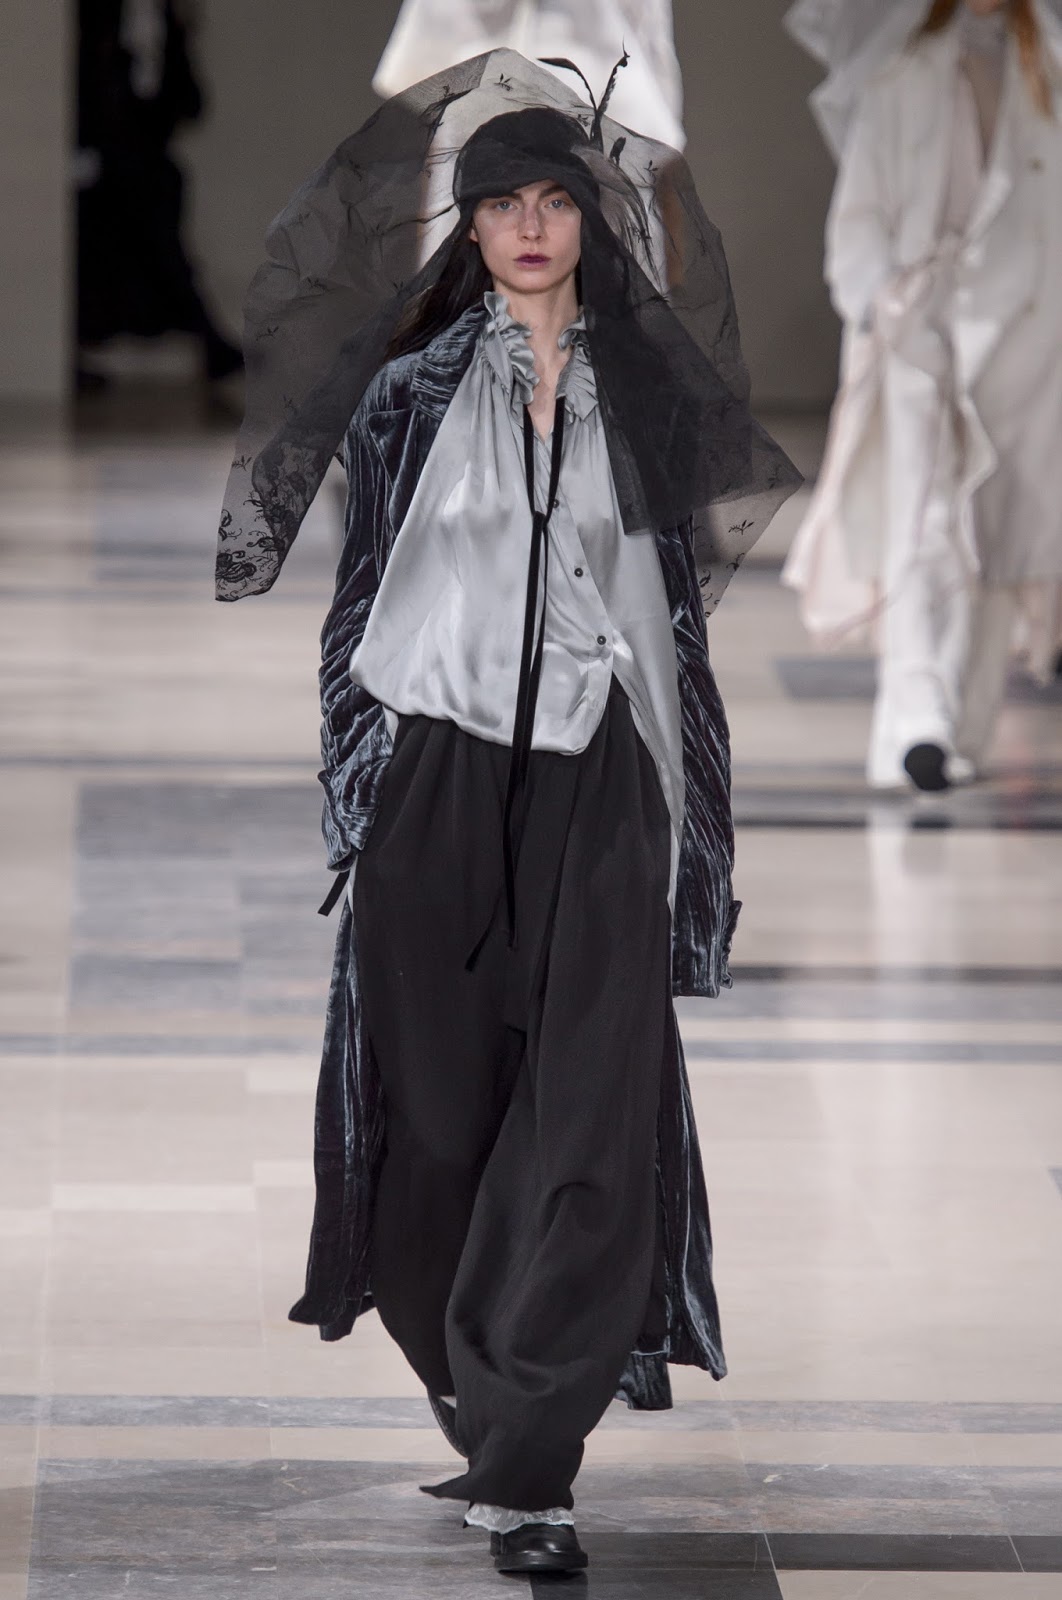 FEATHERS AND FLOW: ANN DEMEULEMEESTER March 9, 2017 | ZsaZsa Bellagio ...